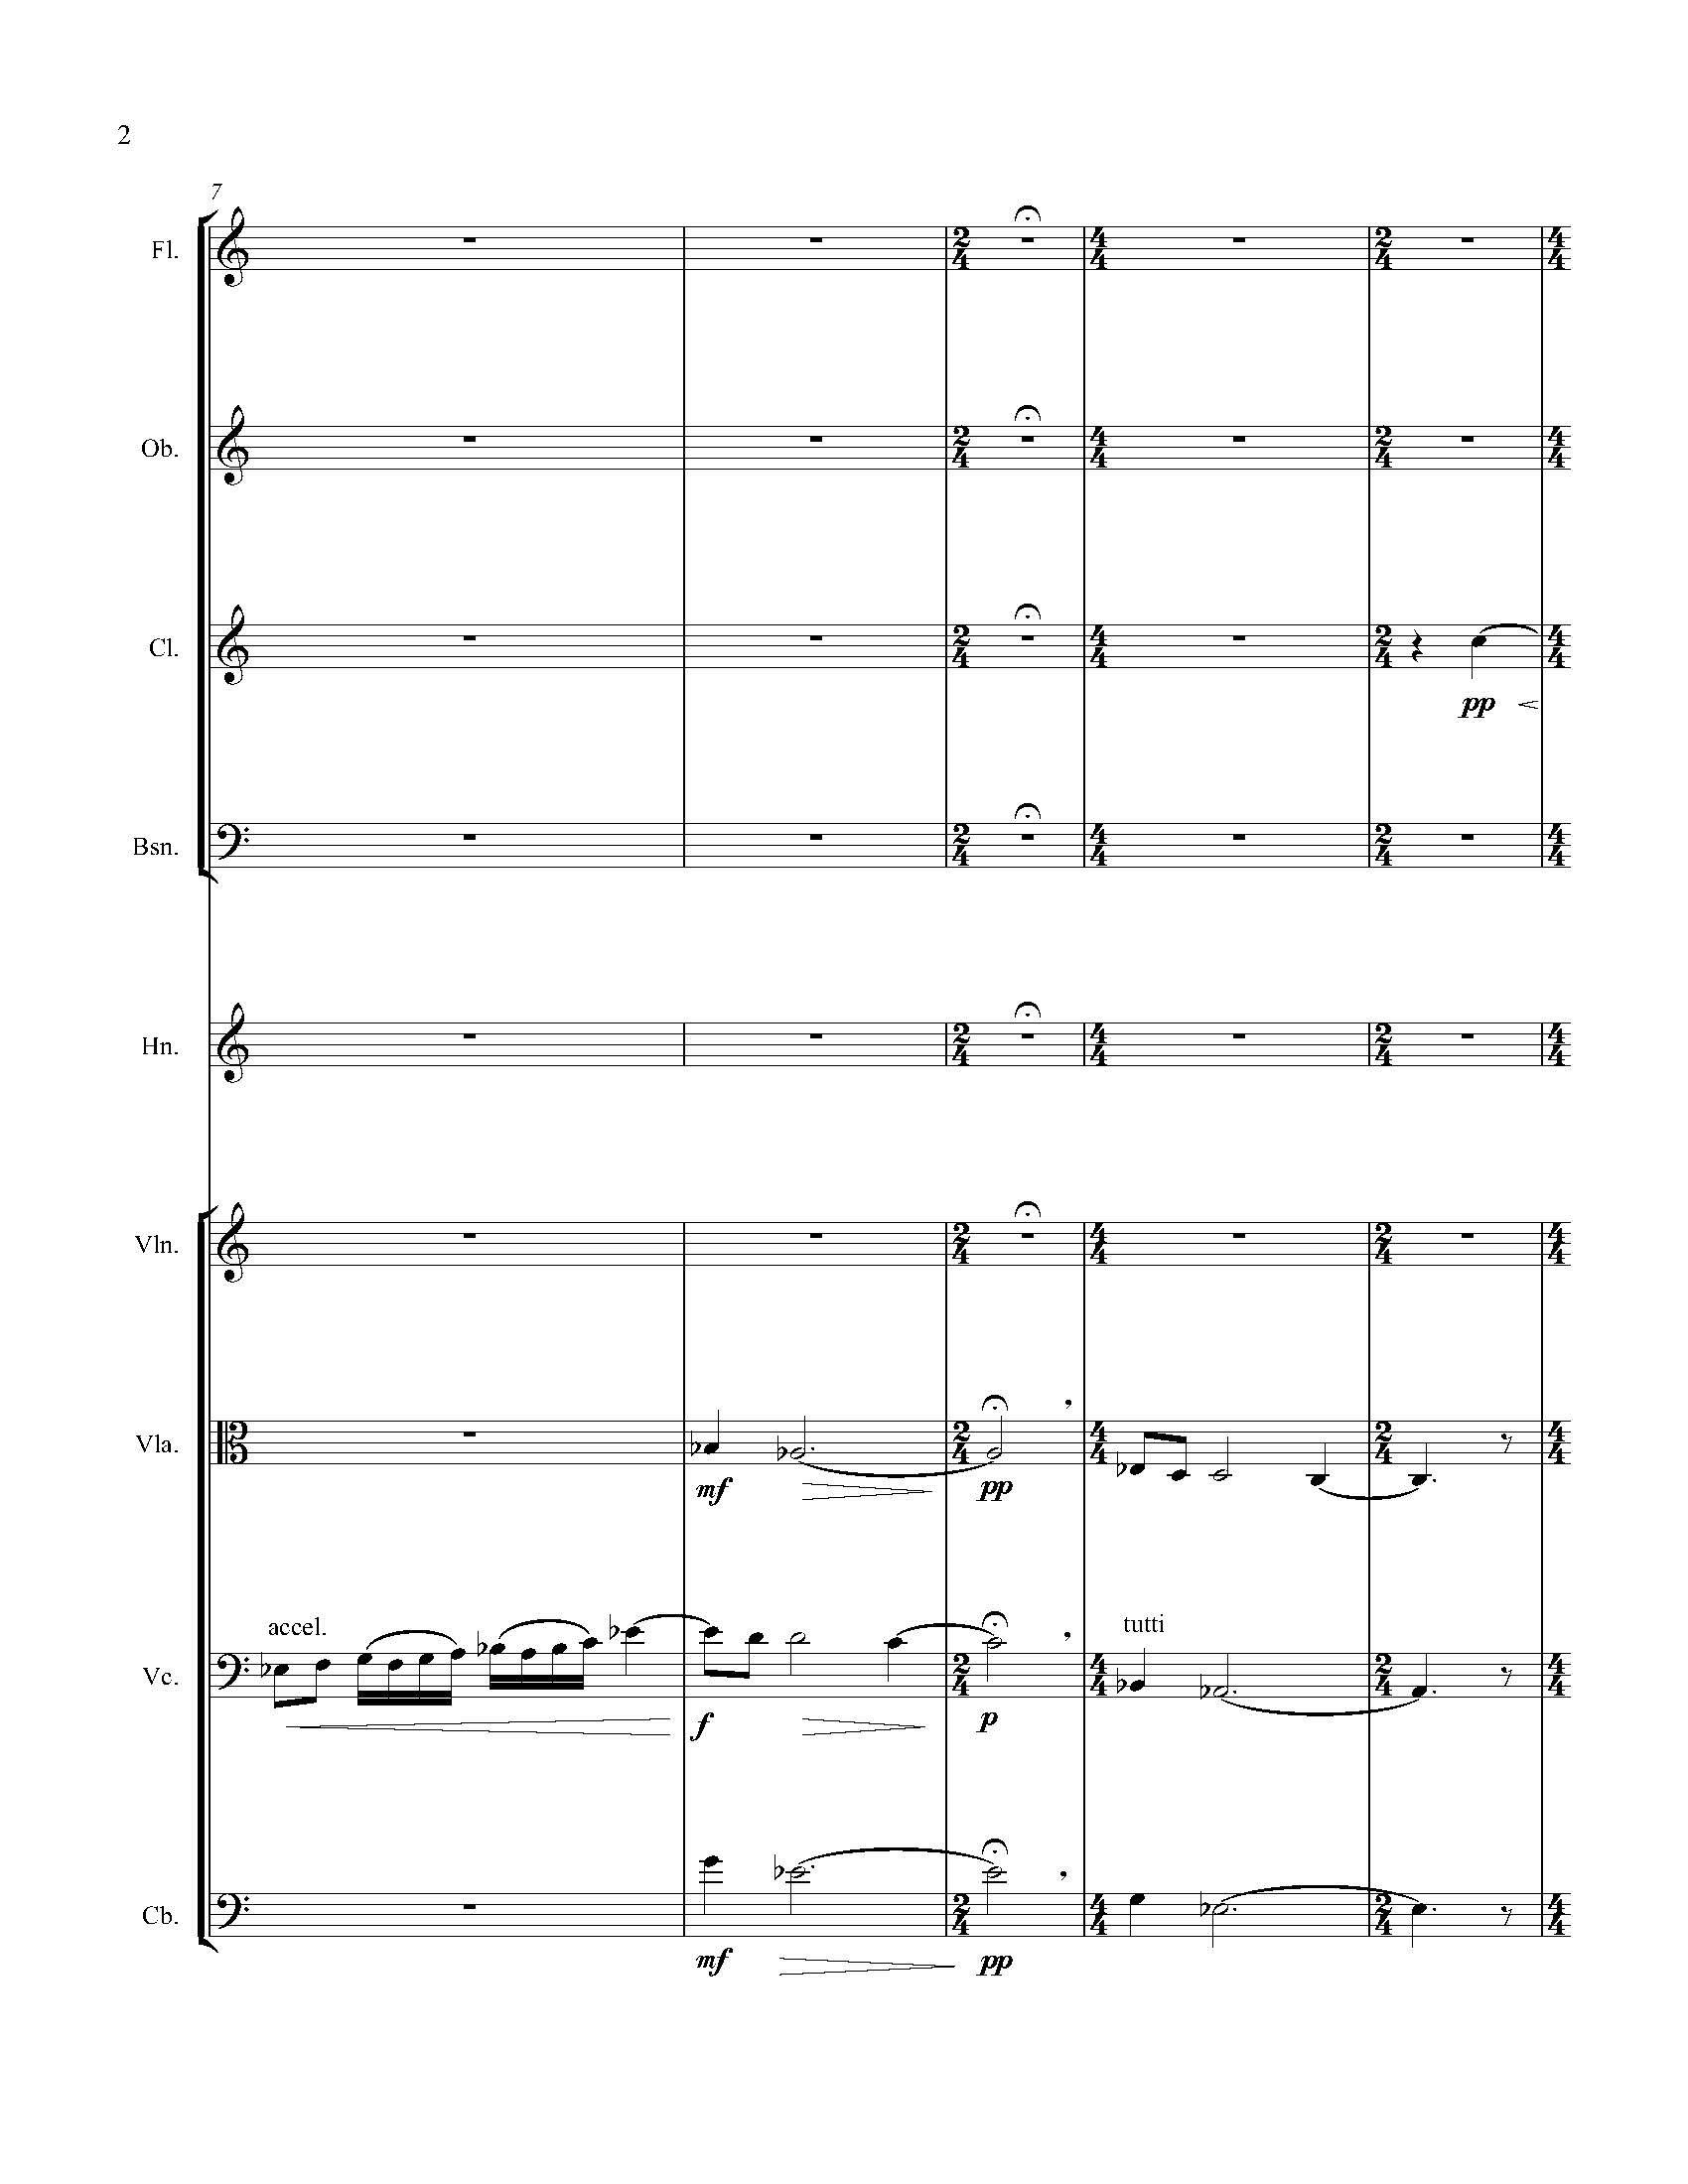 In Search of a Bird - Complete Score_Page_08.jpg